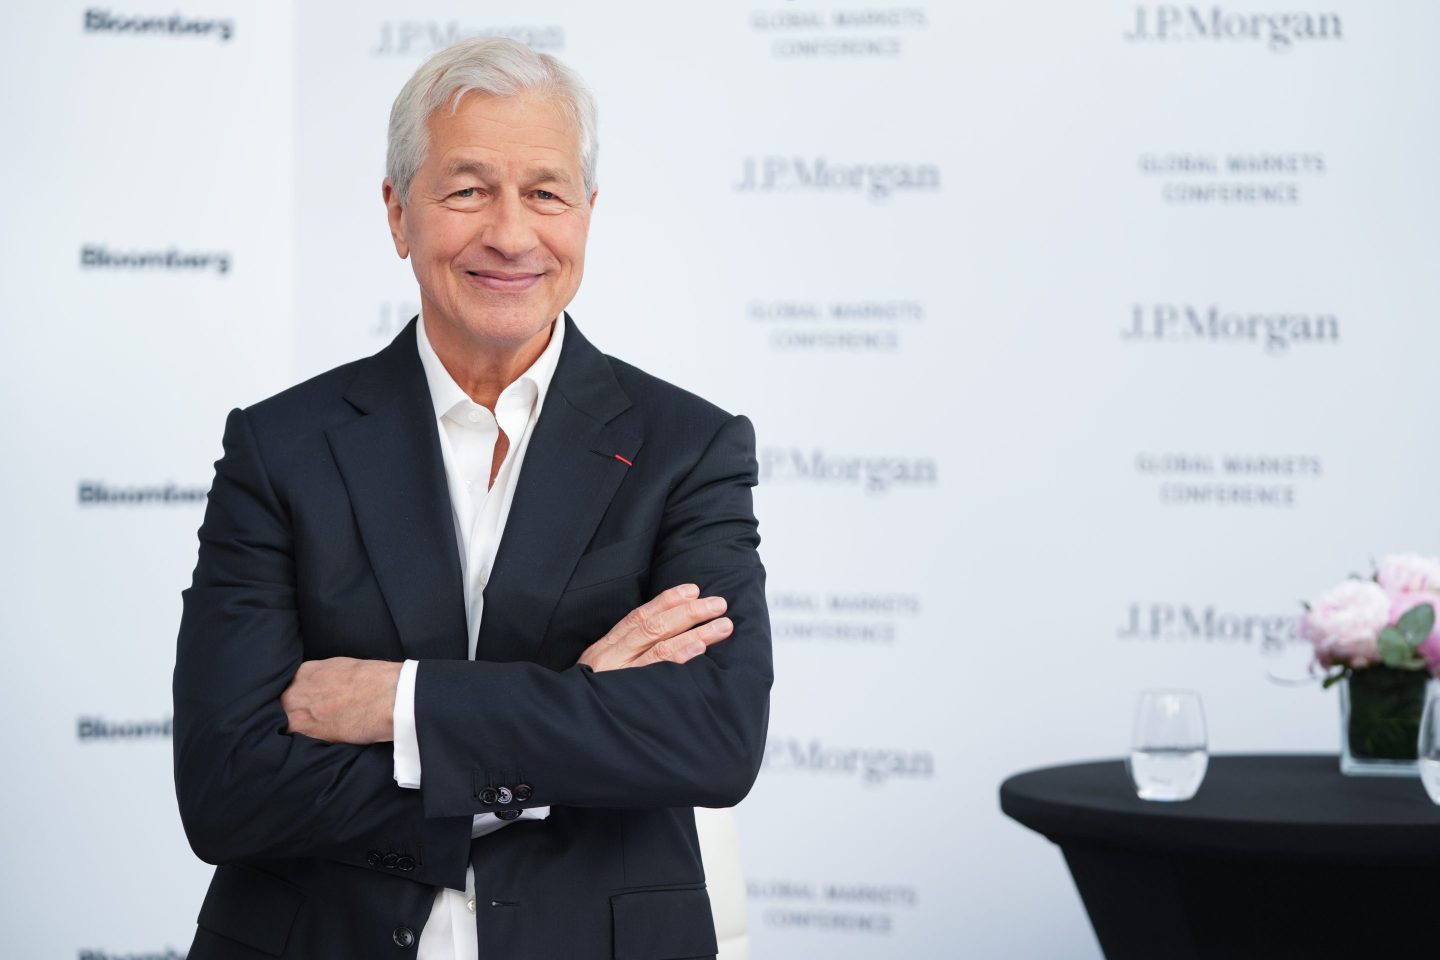 Jamie Dimon, chief executive officer of JPMorgan Chase